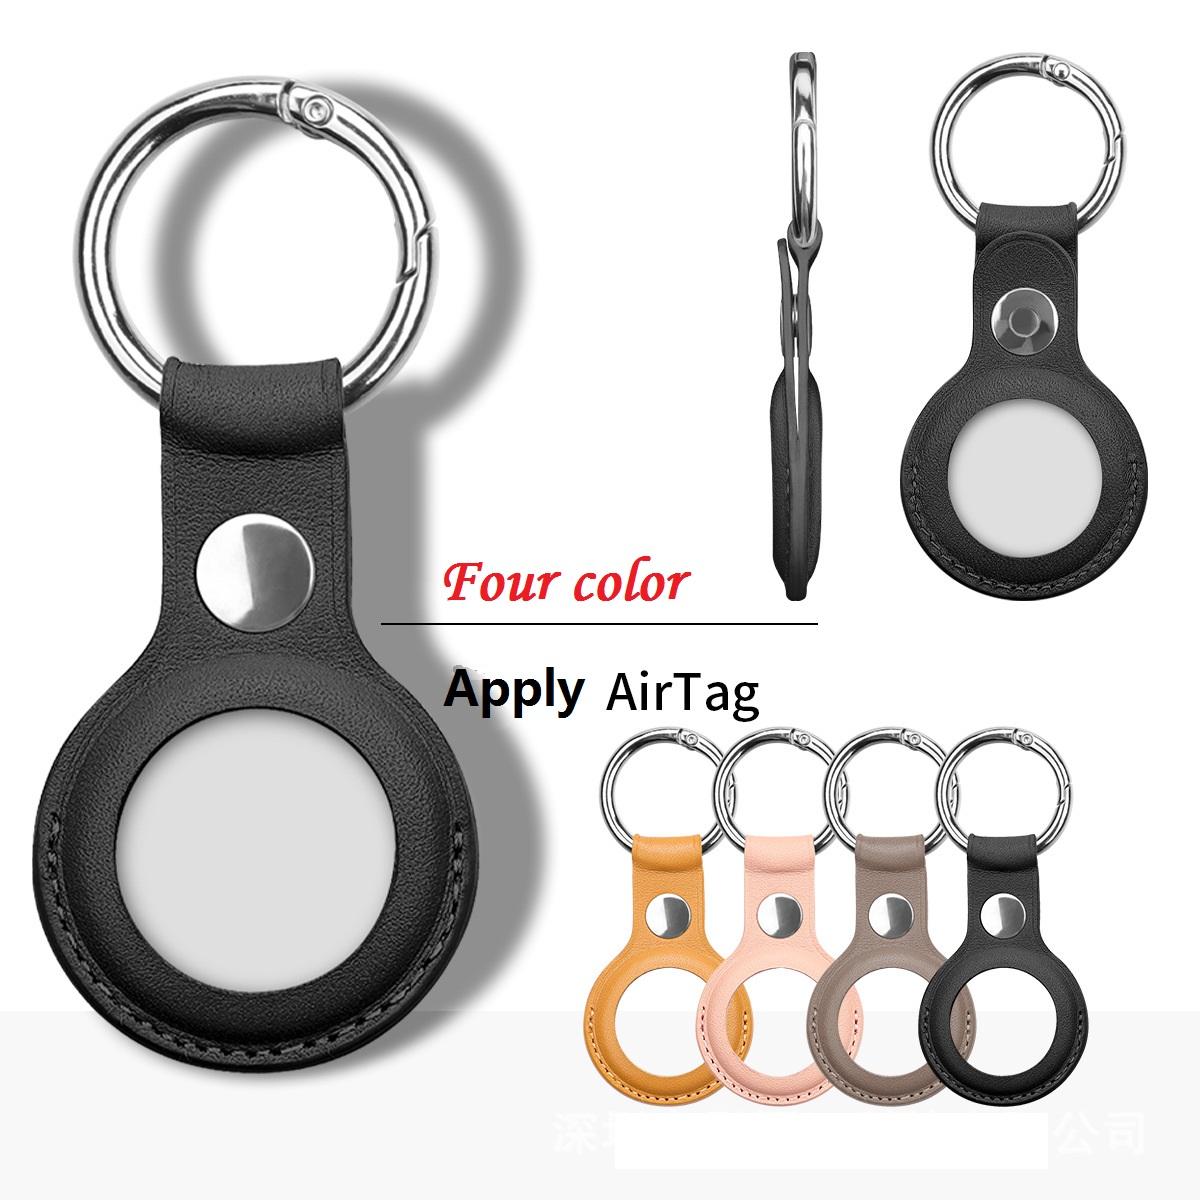 100pcs/lot Airtags Protective Case Keychains Anti Lost Real Leather Cases Protect Skin Cover Sleeve Bluetooth Tracker Keychain